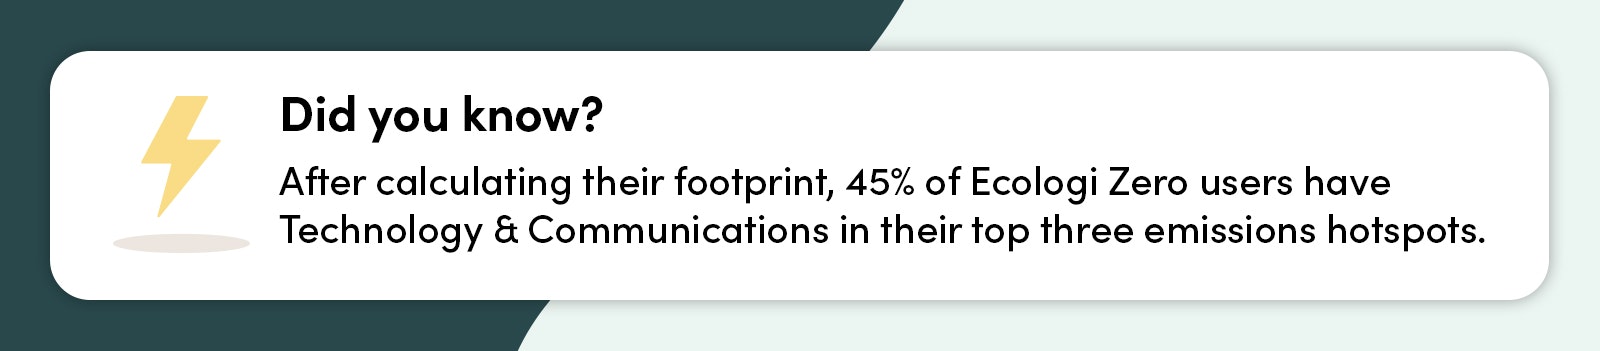 Did you know? After calculating their footprint, 45% of Ecologi Zero users have Technology & Communications in their top three emissions hotspots.